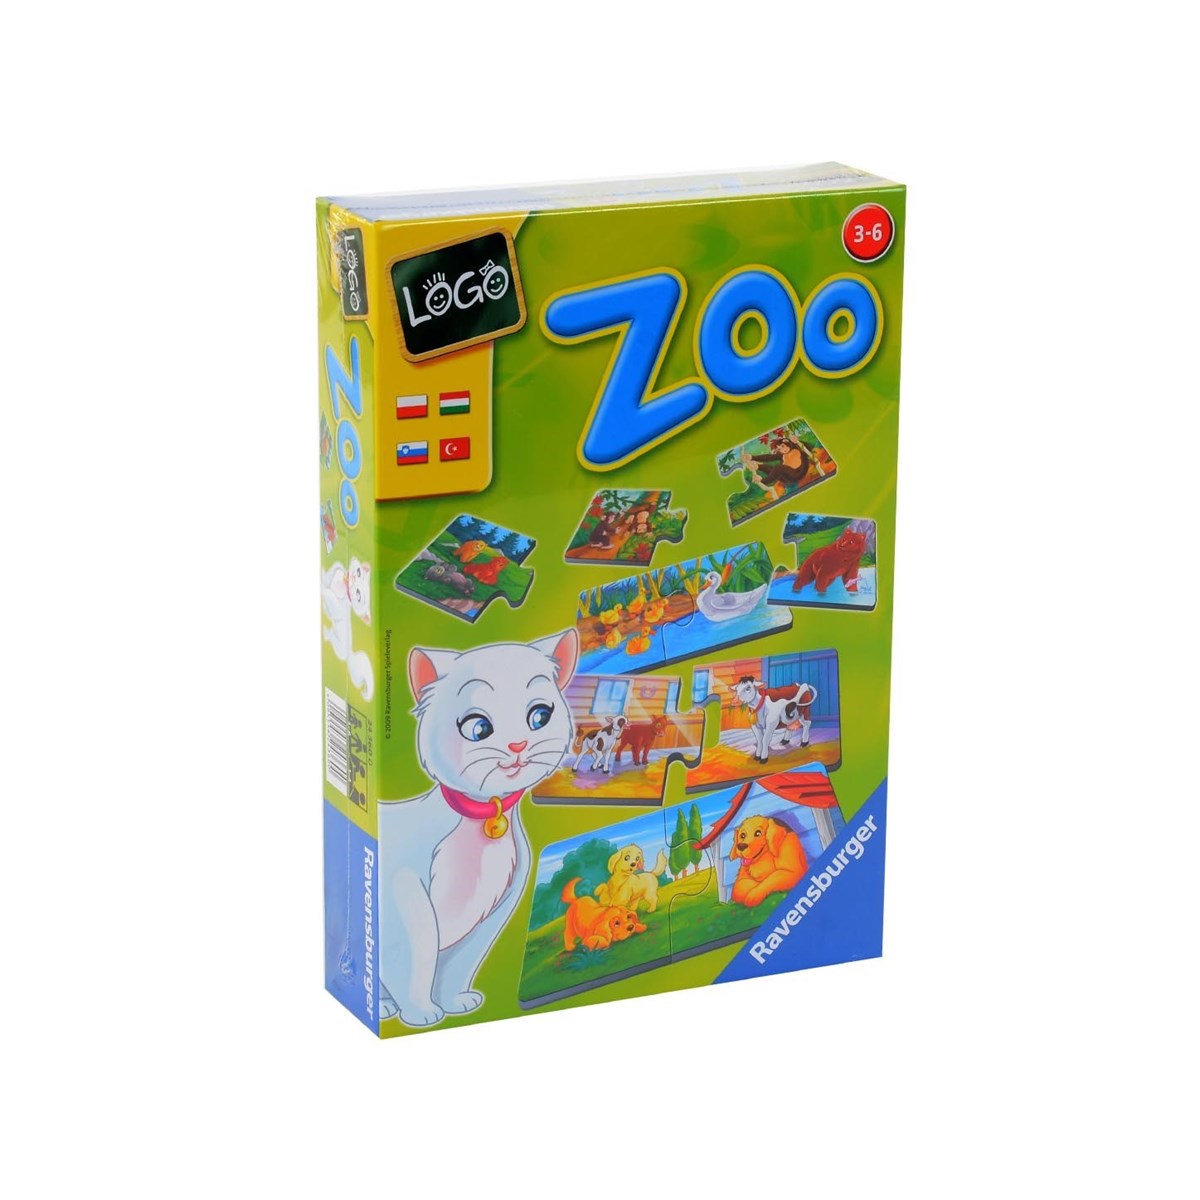 Ravensburger Logo Games - Zoo,  Educative Games, Board Games for 3+ , Shapes and Colors, Games for Children Ages 3-6